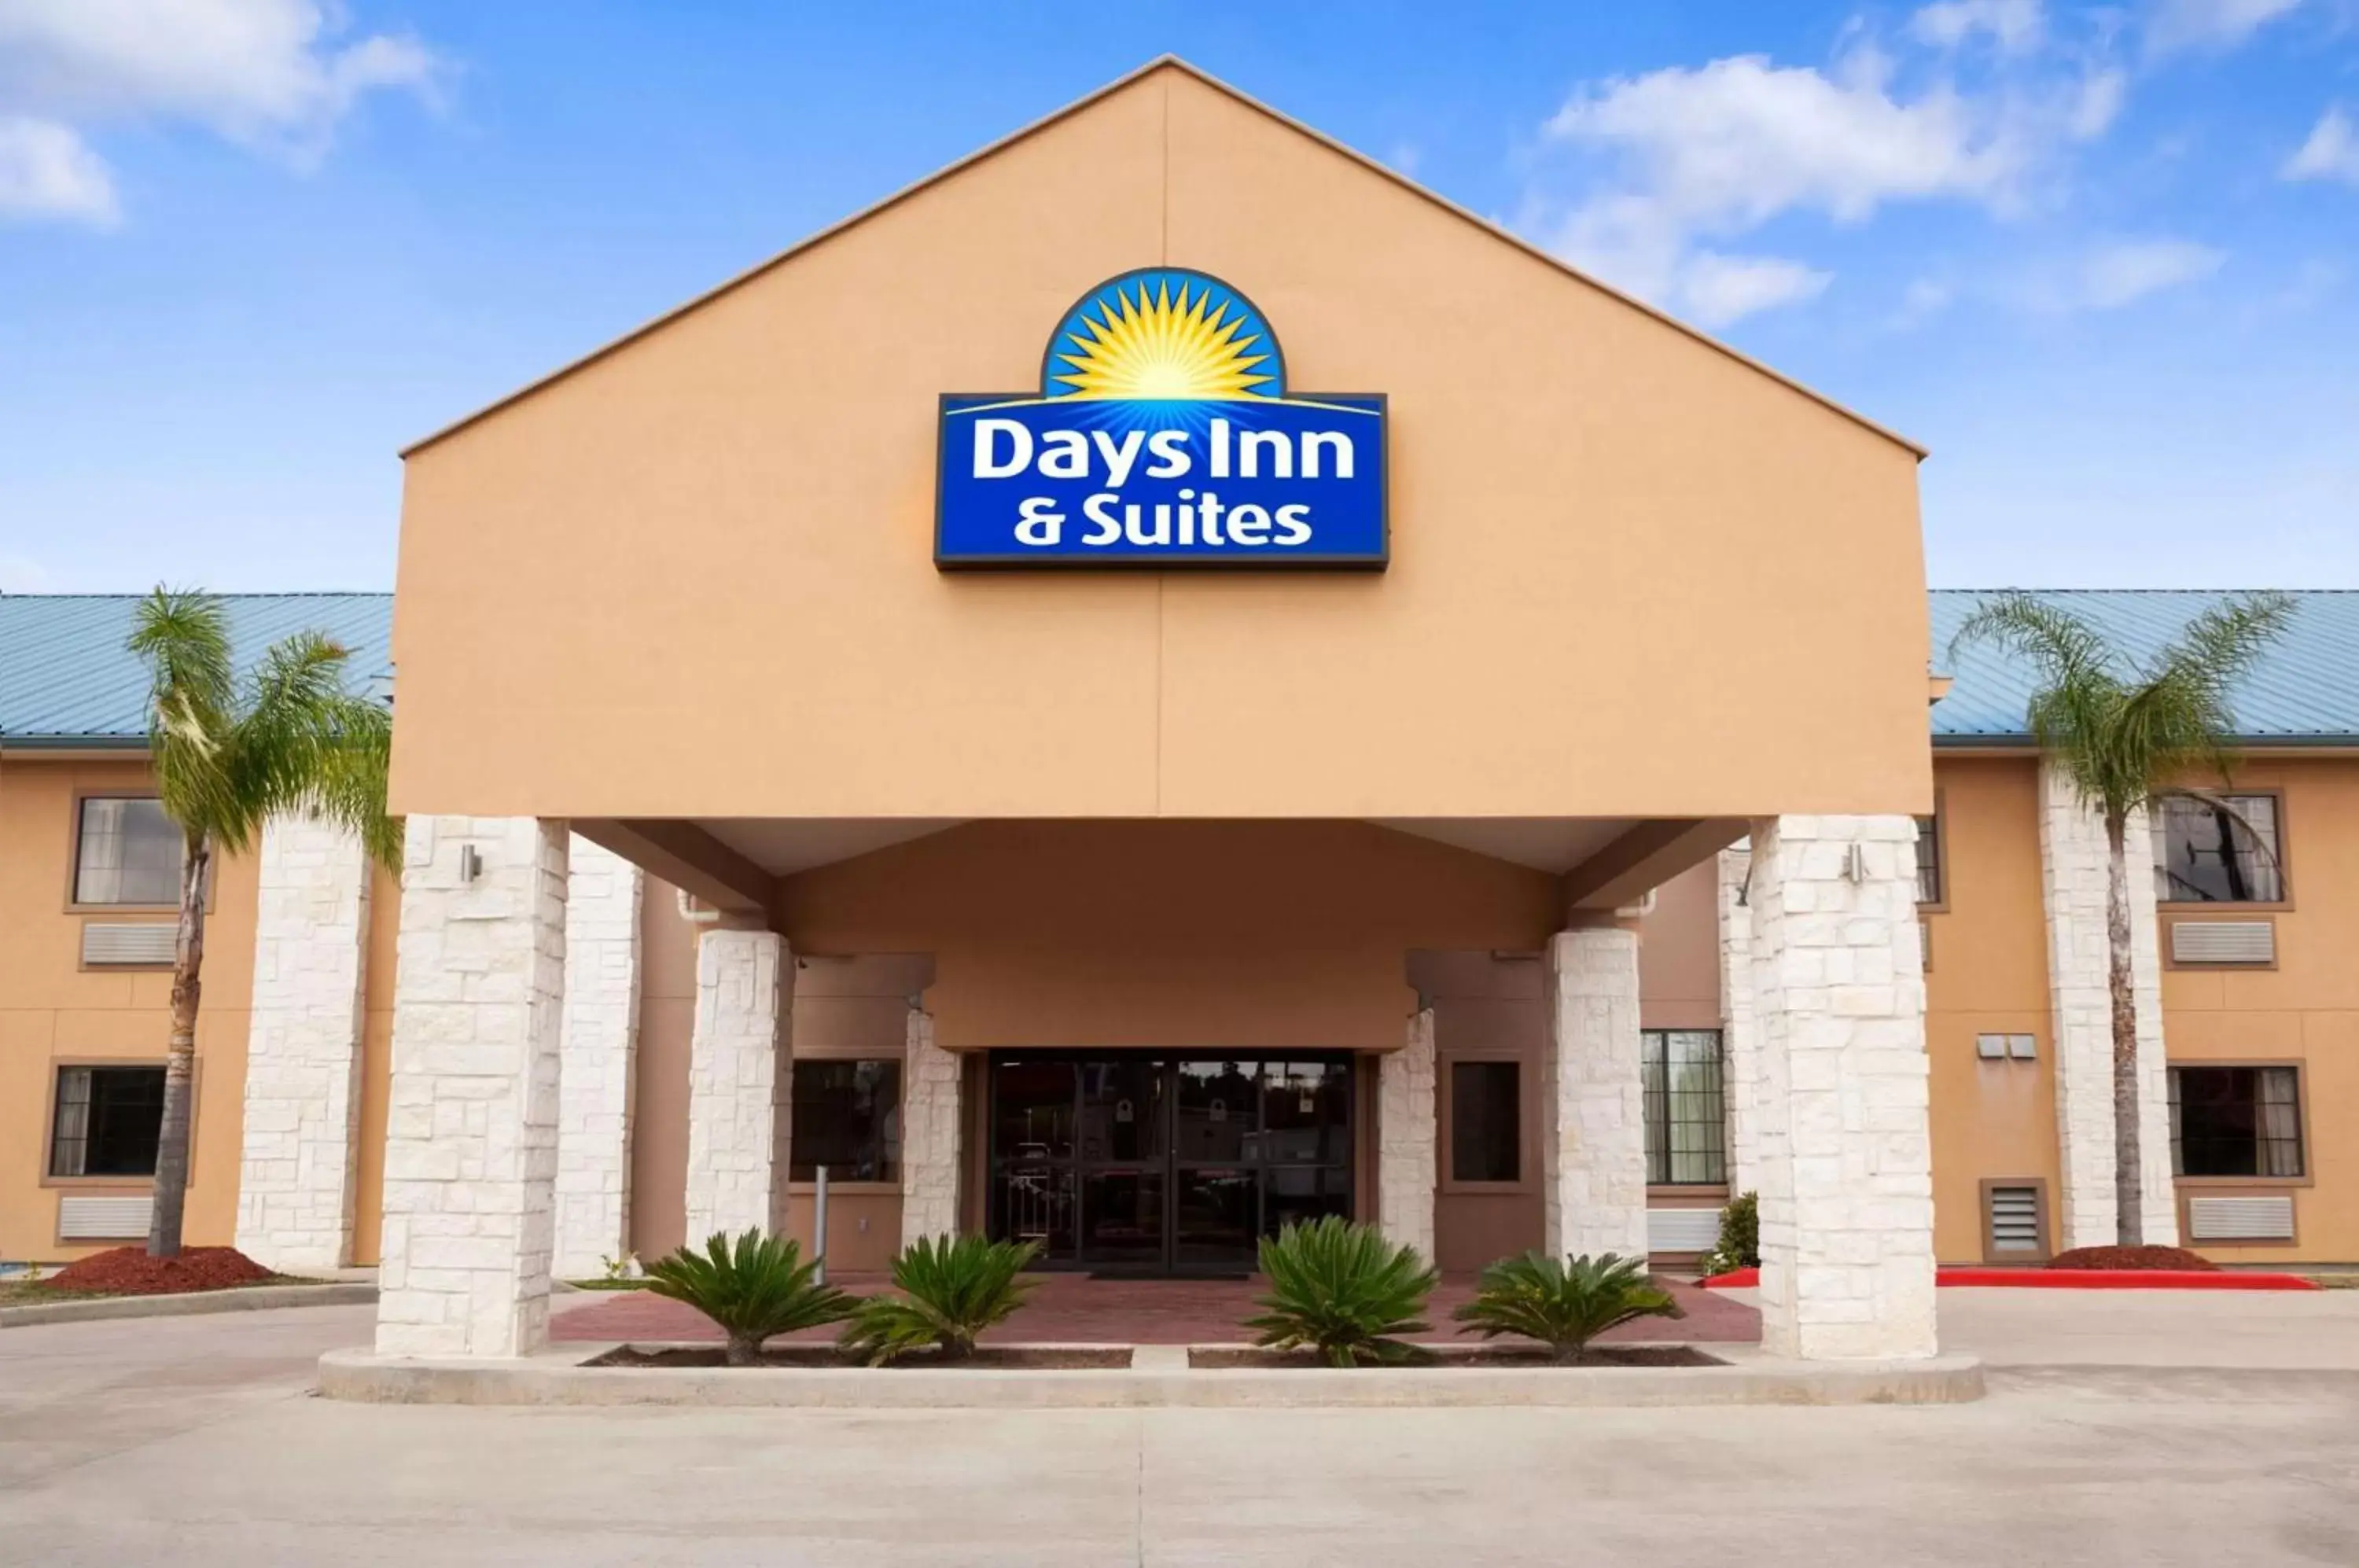 Property building in Days Inn & Suites by Wyndham Conroe North